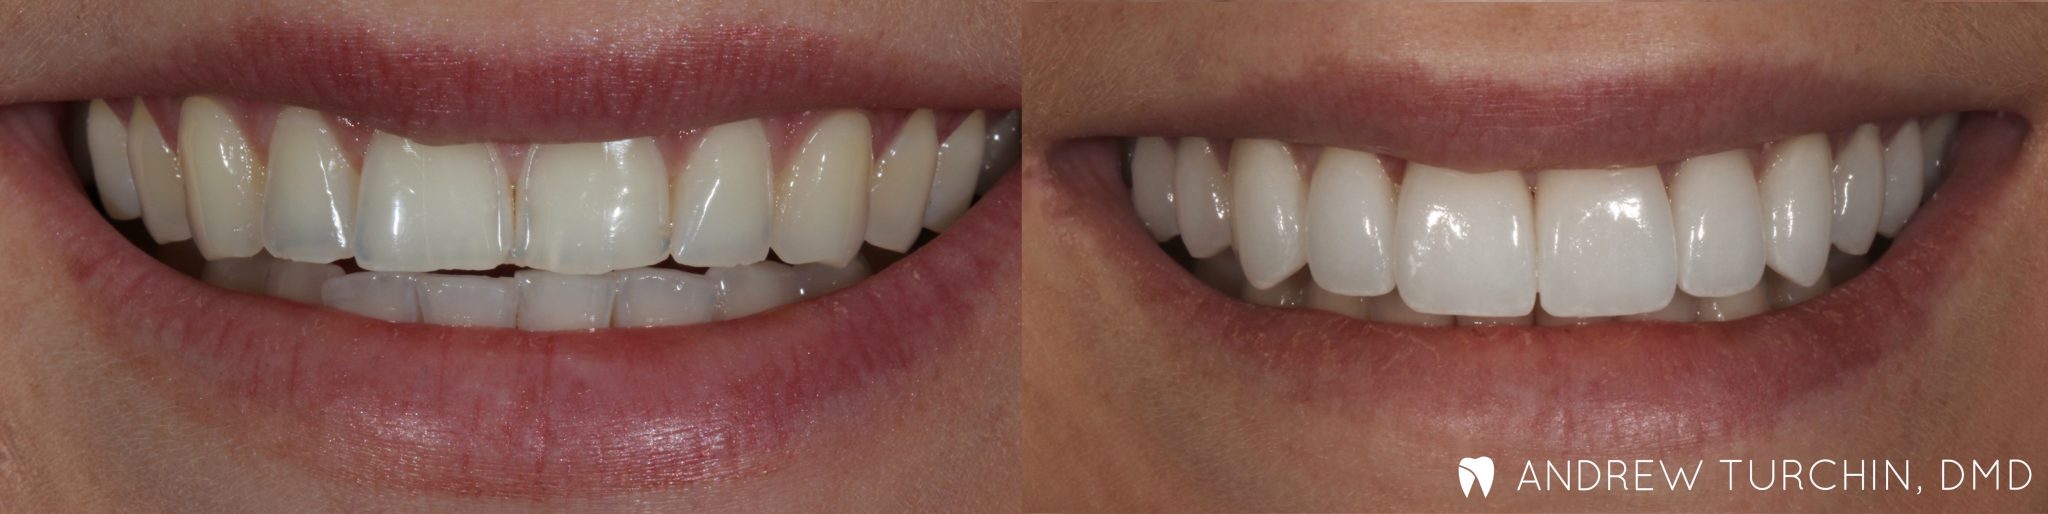 before & after dental photos